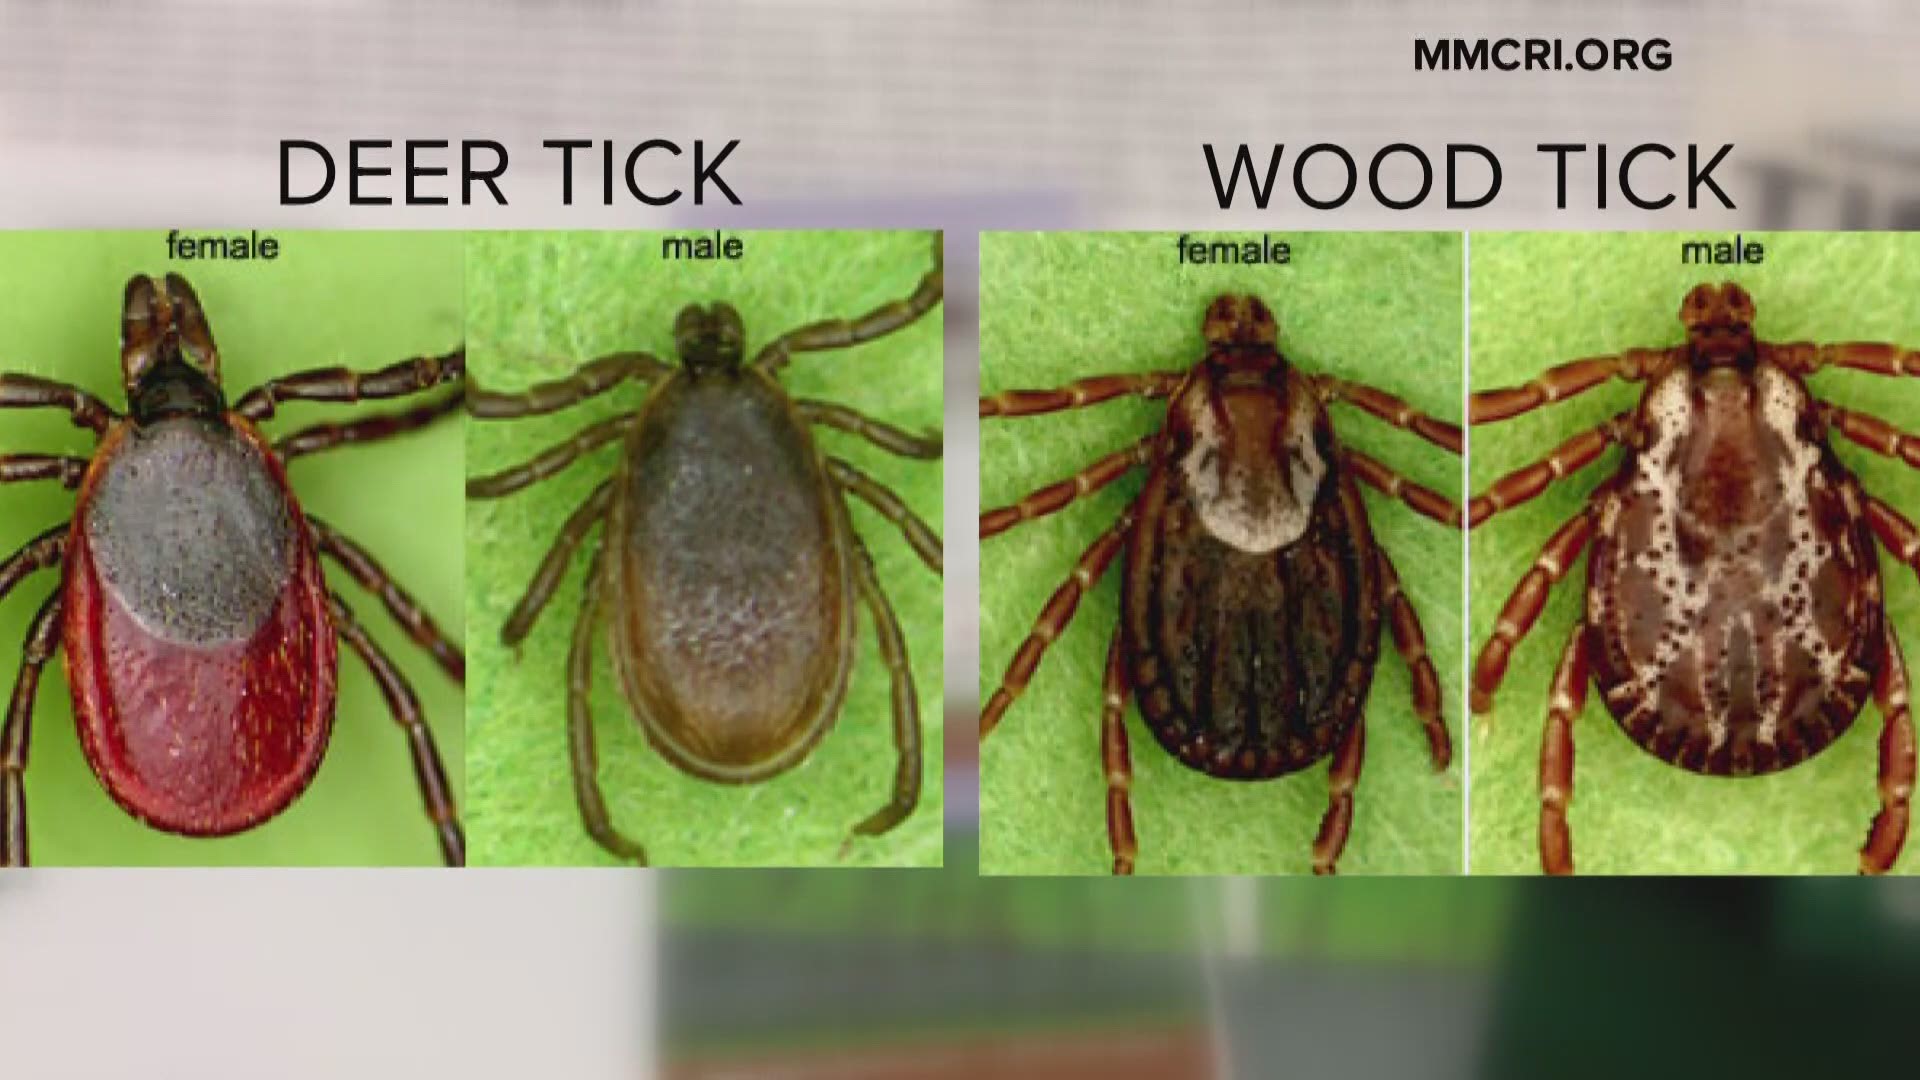 “It’s not uncommon for people to come out of the woods with 20, 30, 40 ticks at a time”